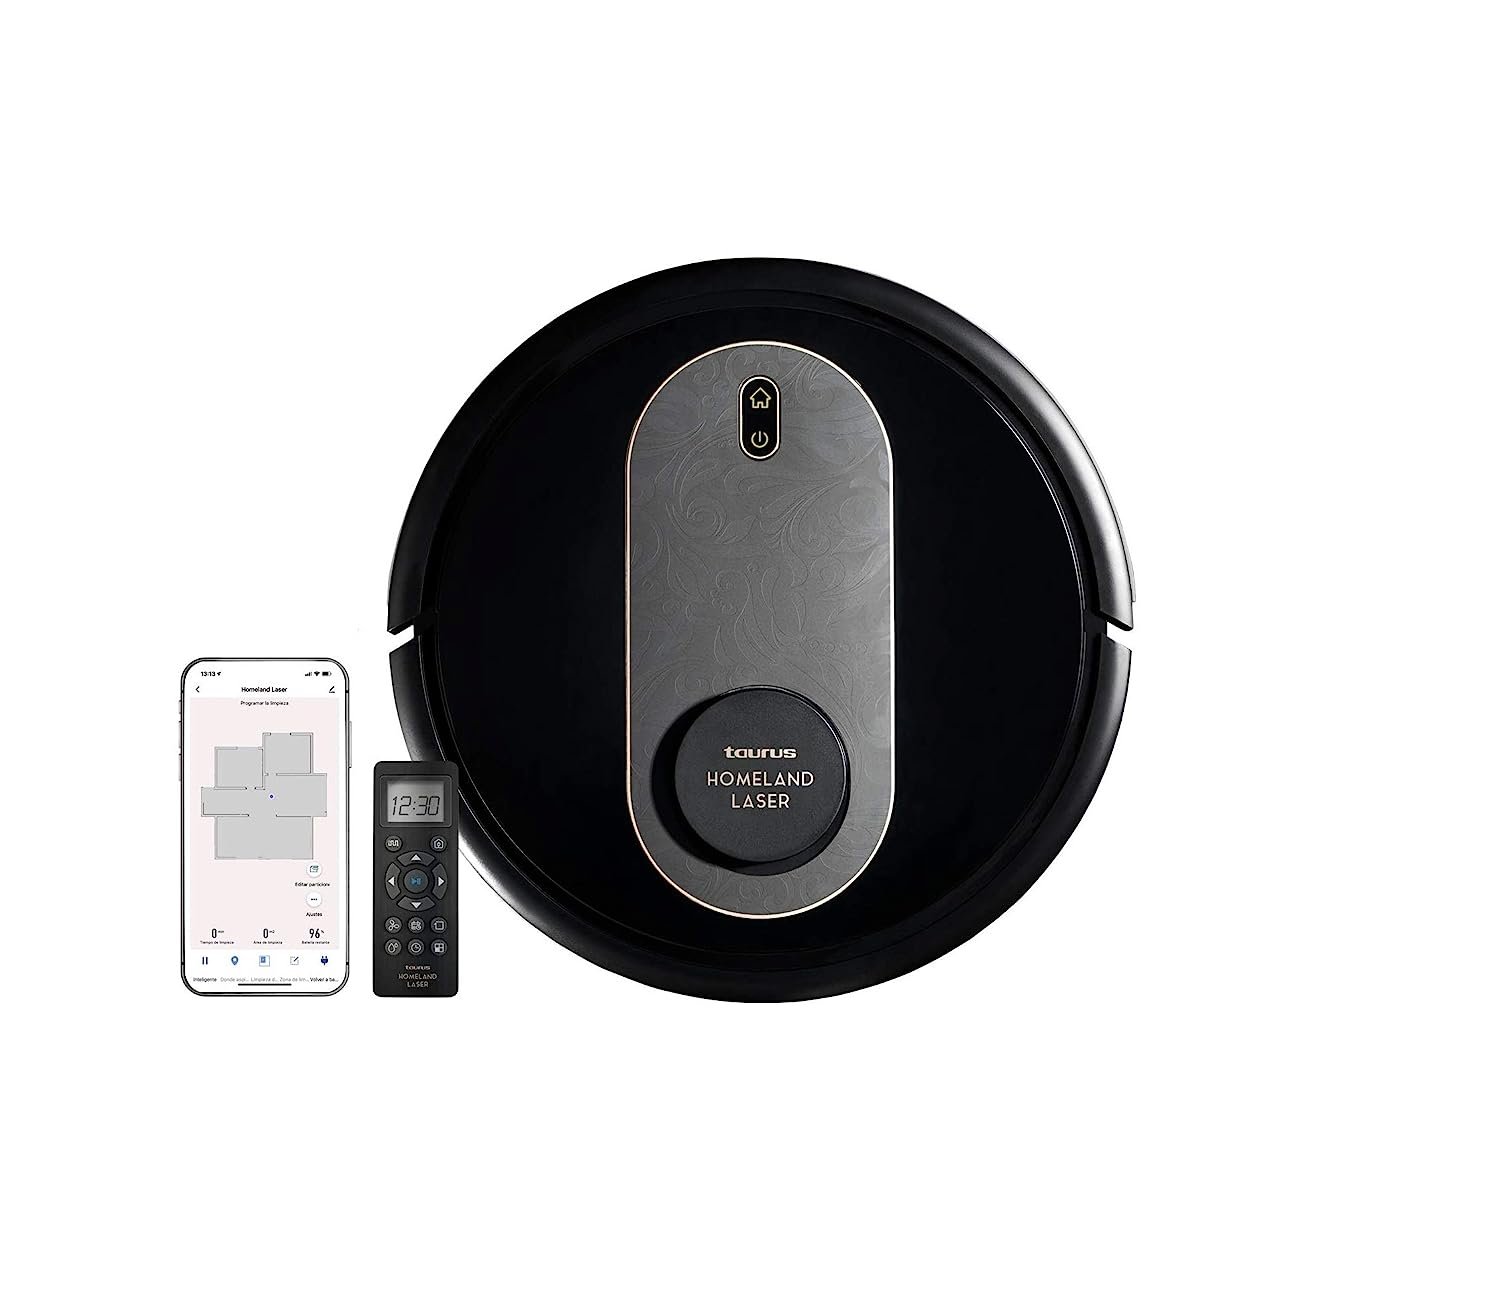 Taurus Inalsa Robot Vacuum Cleaner Homeland Laser- 4 in 1 Function|Vacuum,Scrub, Mop & Sweep|2300 Pa,Smart Navigation & 10 Cleaning Modes| 120 Min Runtime, Works with Alexa & Google Assistant, (Black)